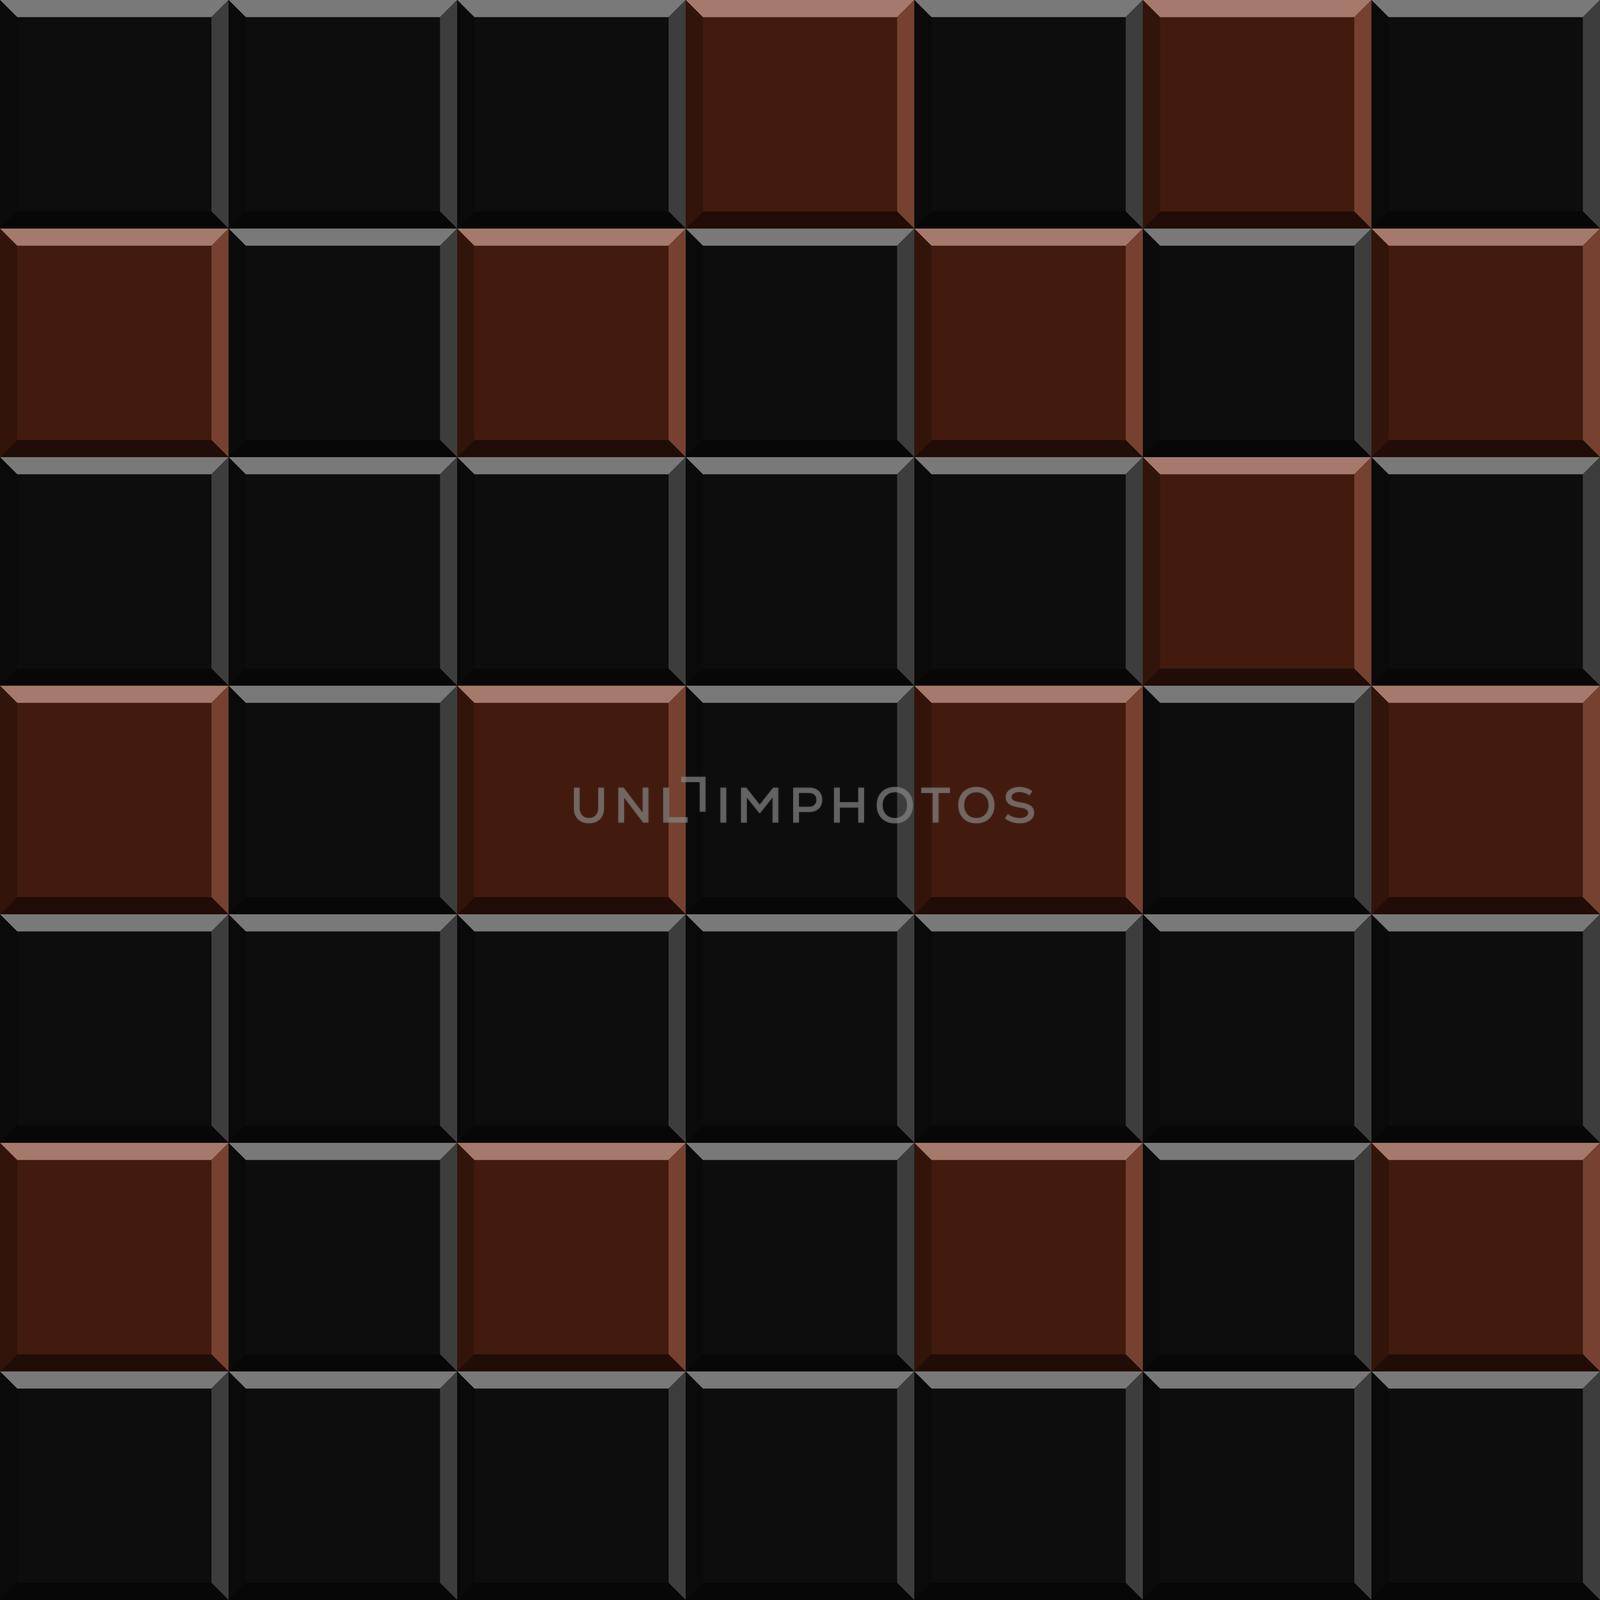 Black and red bricks pattern design solid sheet of wallpaper. Concept of home decor and interior designing by tabishere